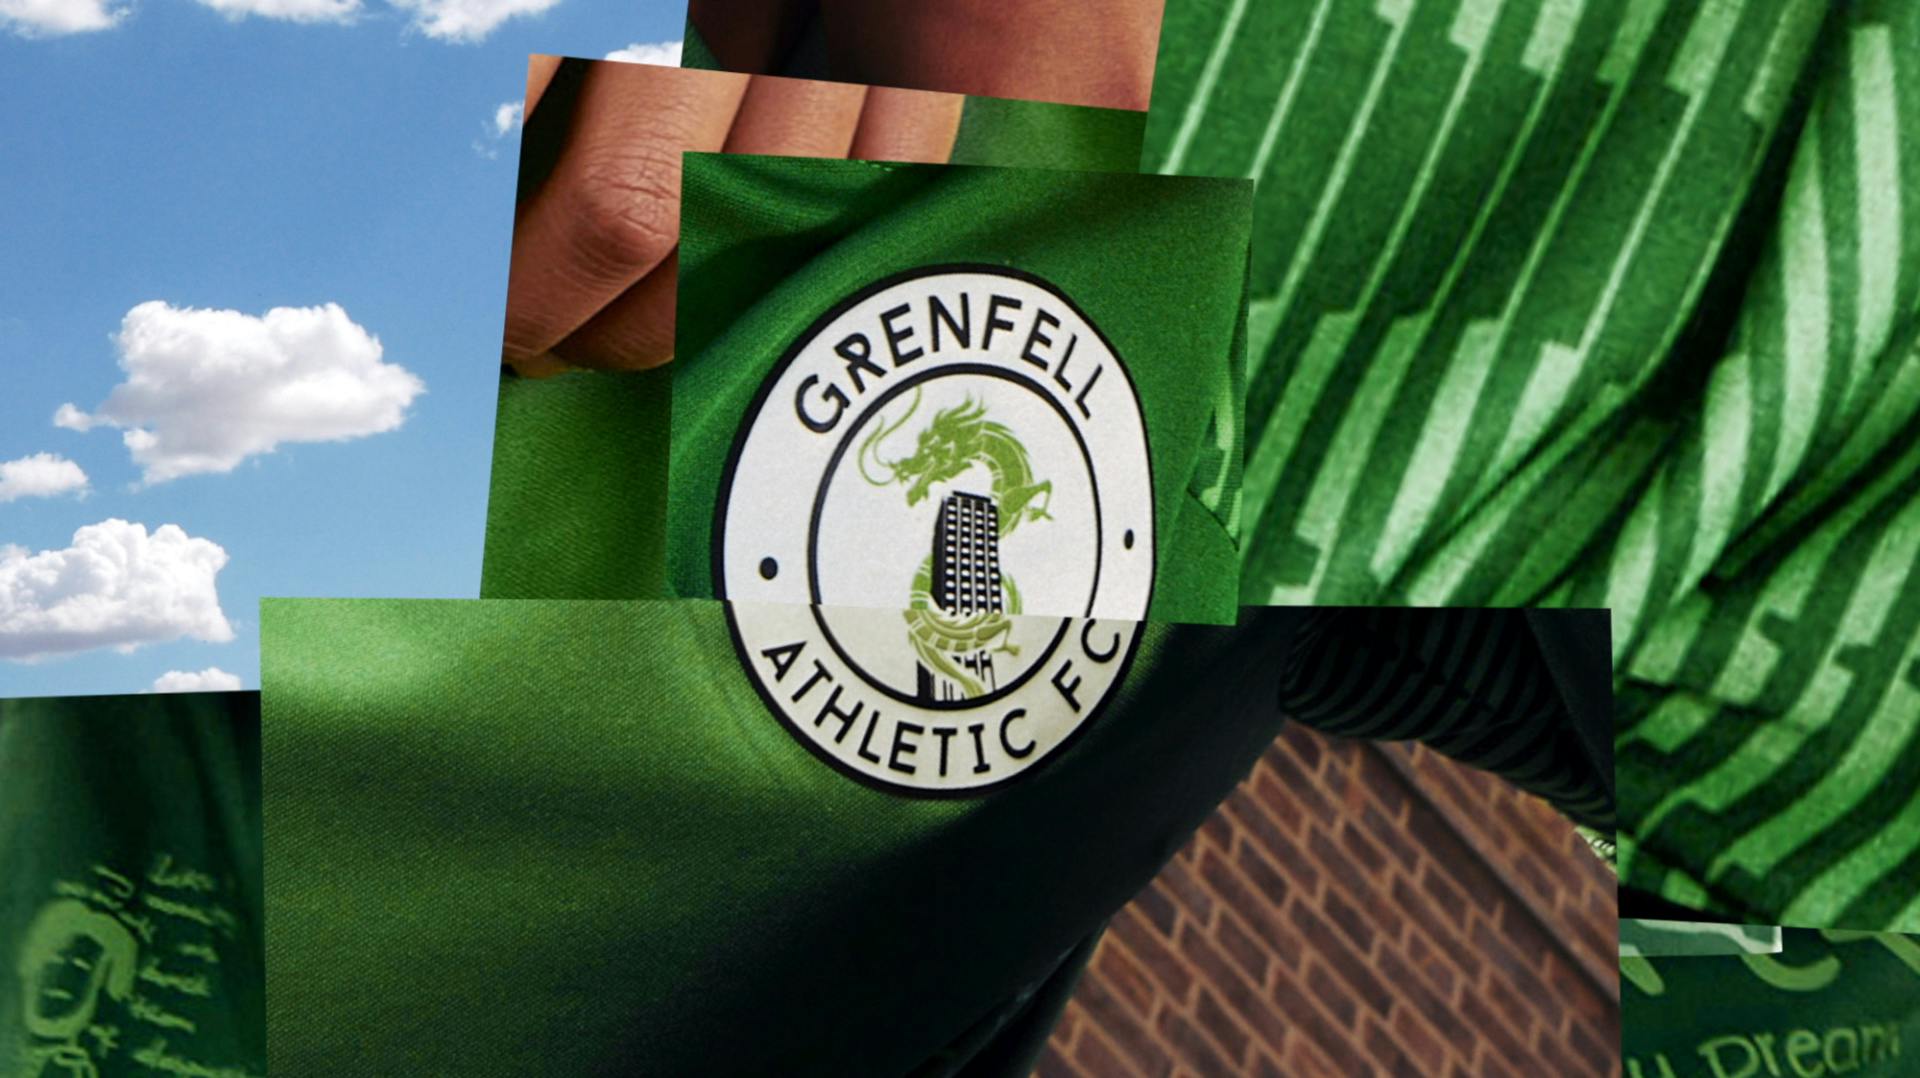 Grenfell Athletic FC